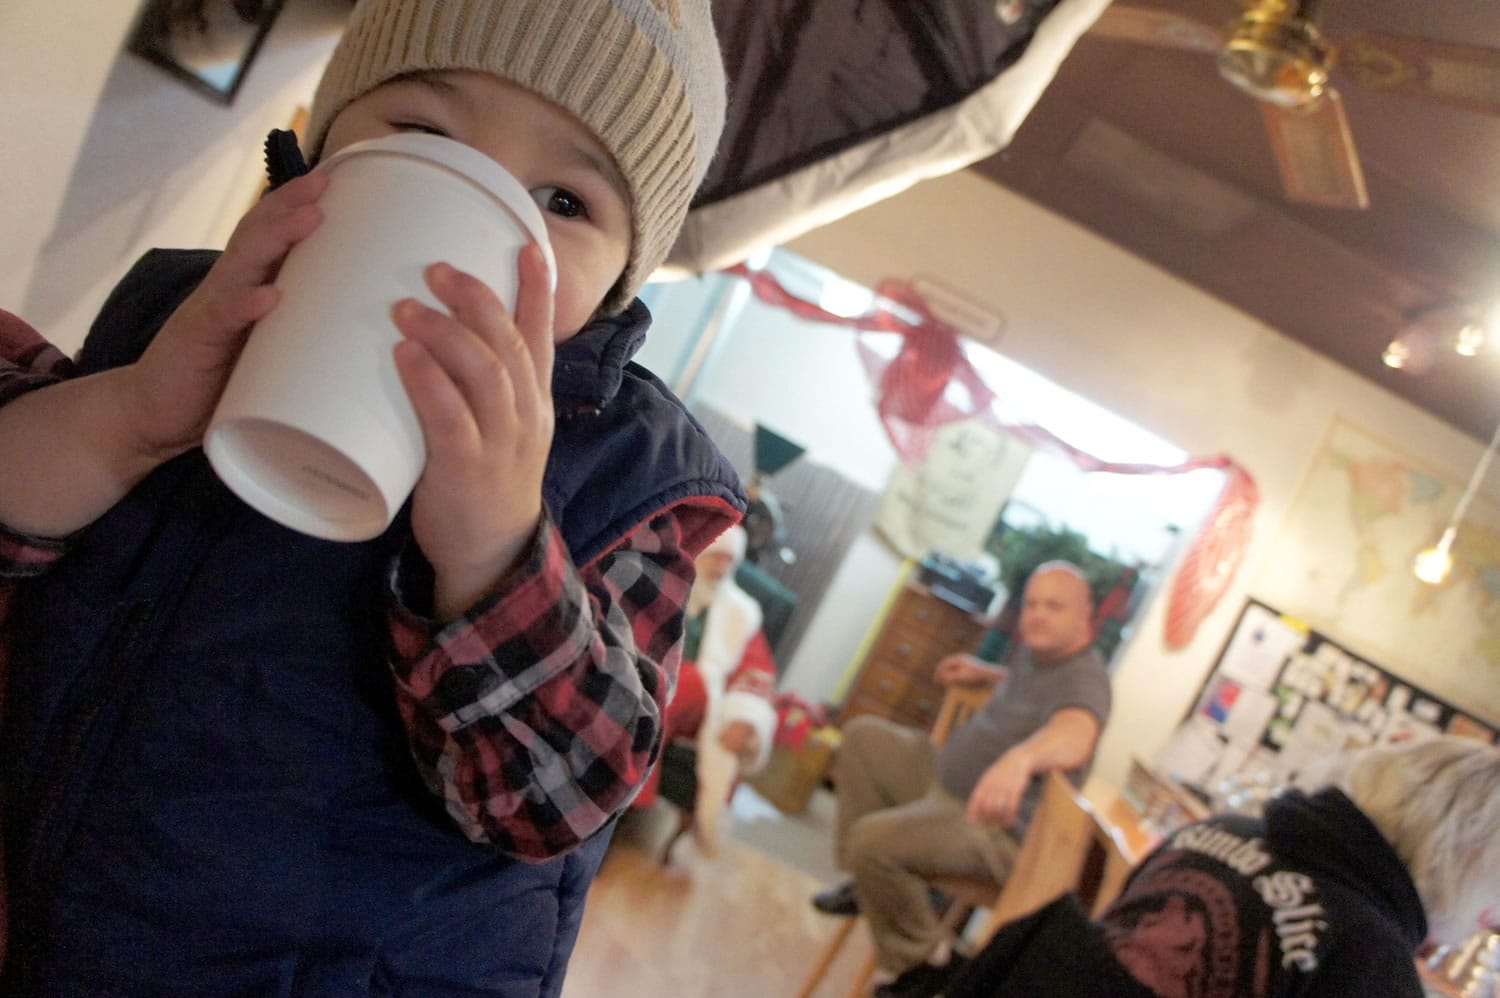 Edgewood Park: Henry Beagle, left, sips a drink under the watchful eye of his father, Andrew, second from right, and Santa Claus during an opportunity to meet Santa at Paper Tiger Coffee Roasters in Vancouver.